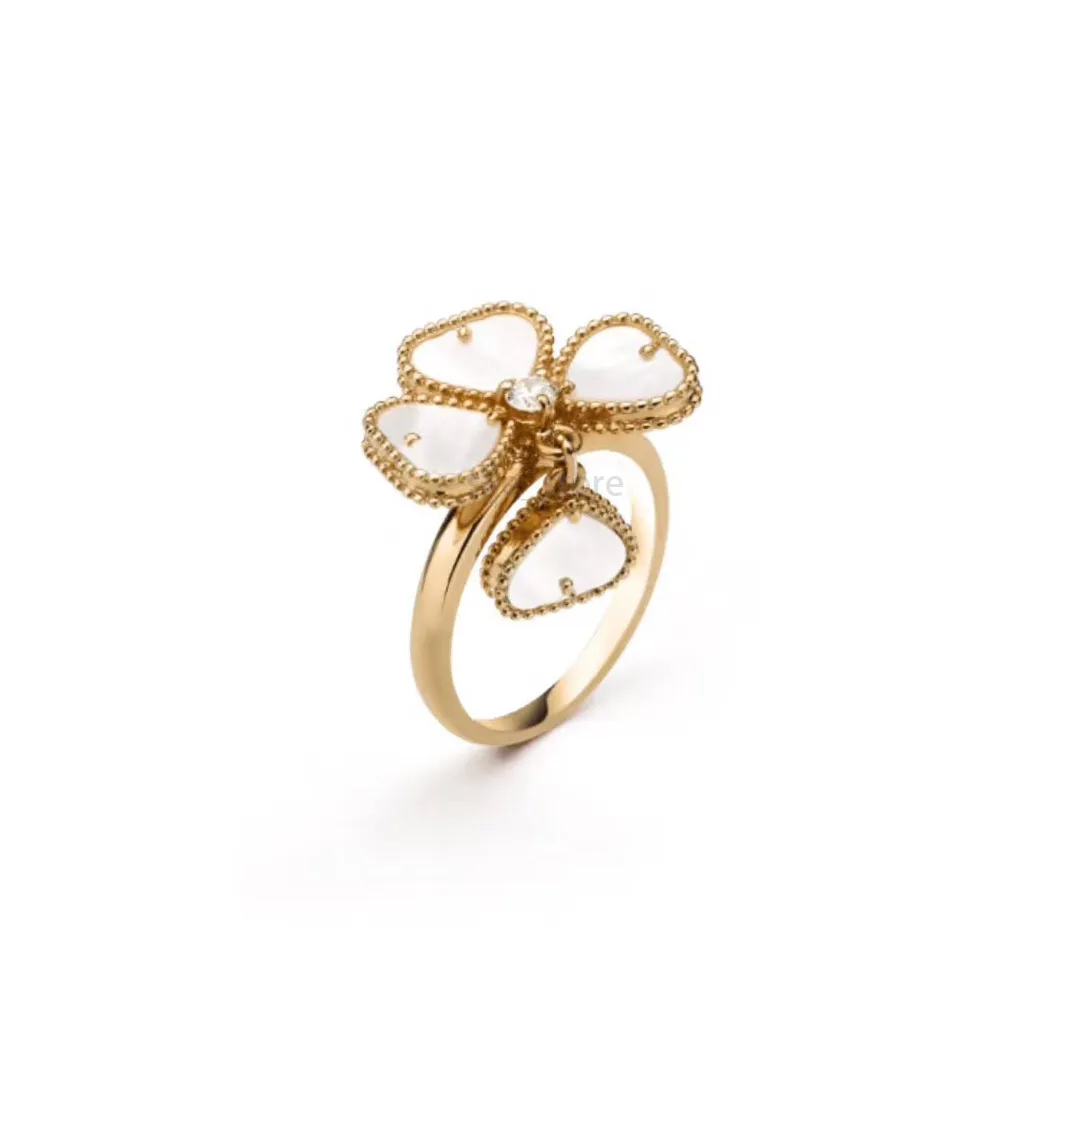 2 flower 4 leaf clover ring designer for women V-GOLD high polished non fade thicker gold plated love rings open adjustable inlay diamond jewelry daily outfit